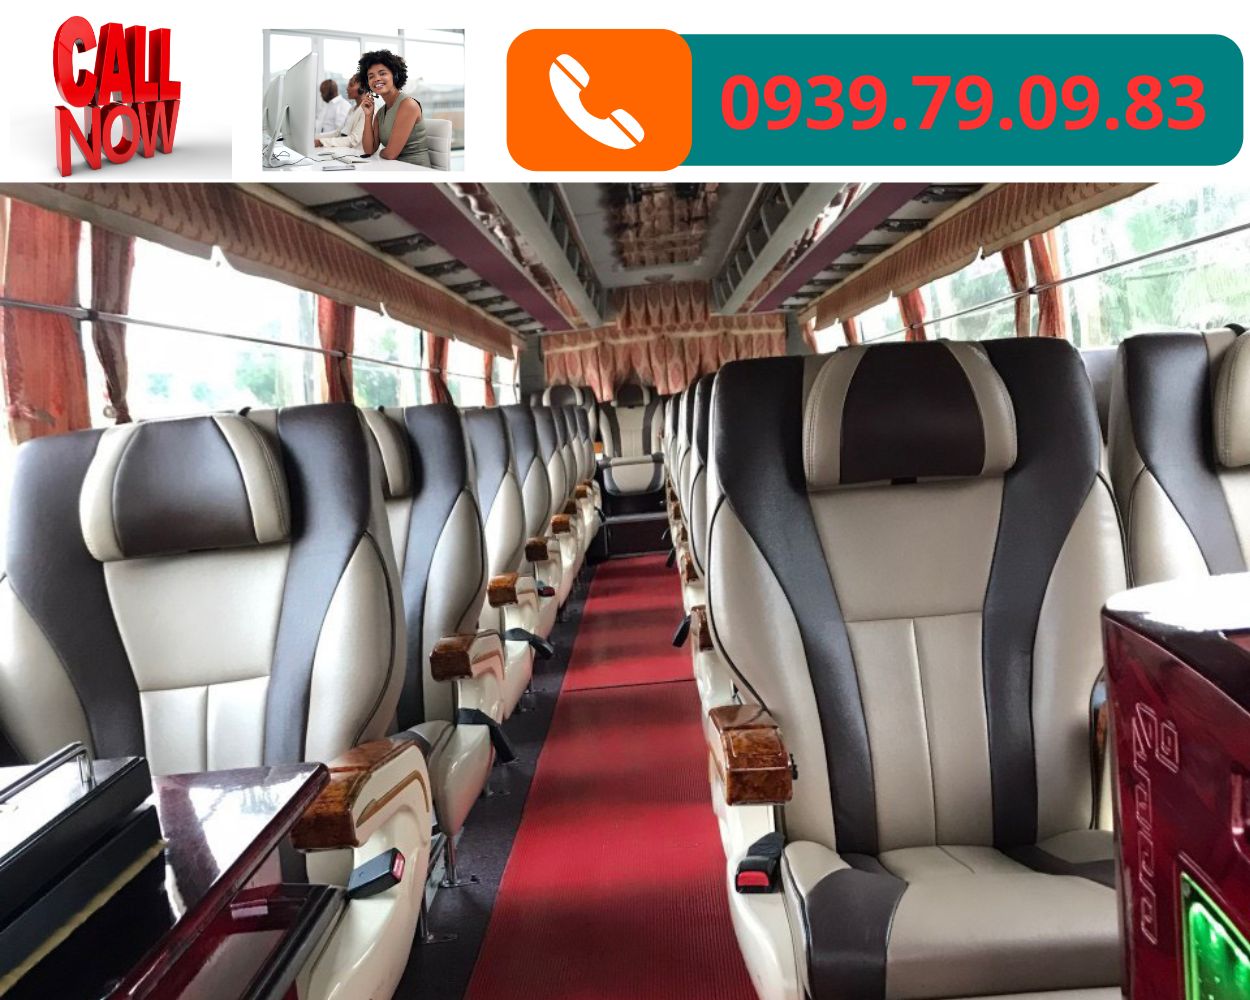 Renting a 28-seat Limousine for Travel/Wedding